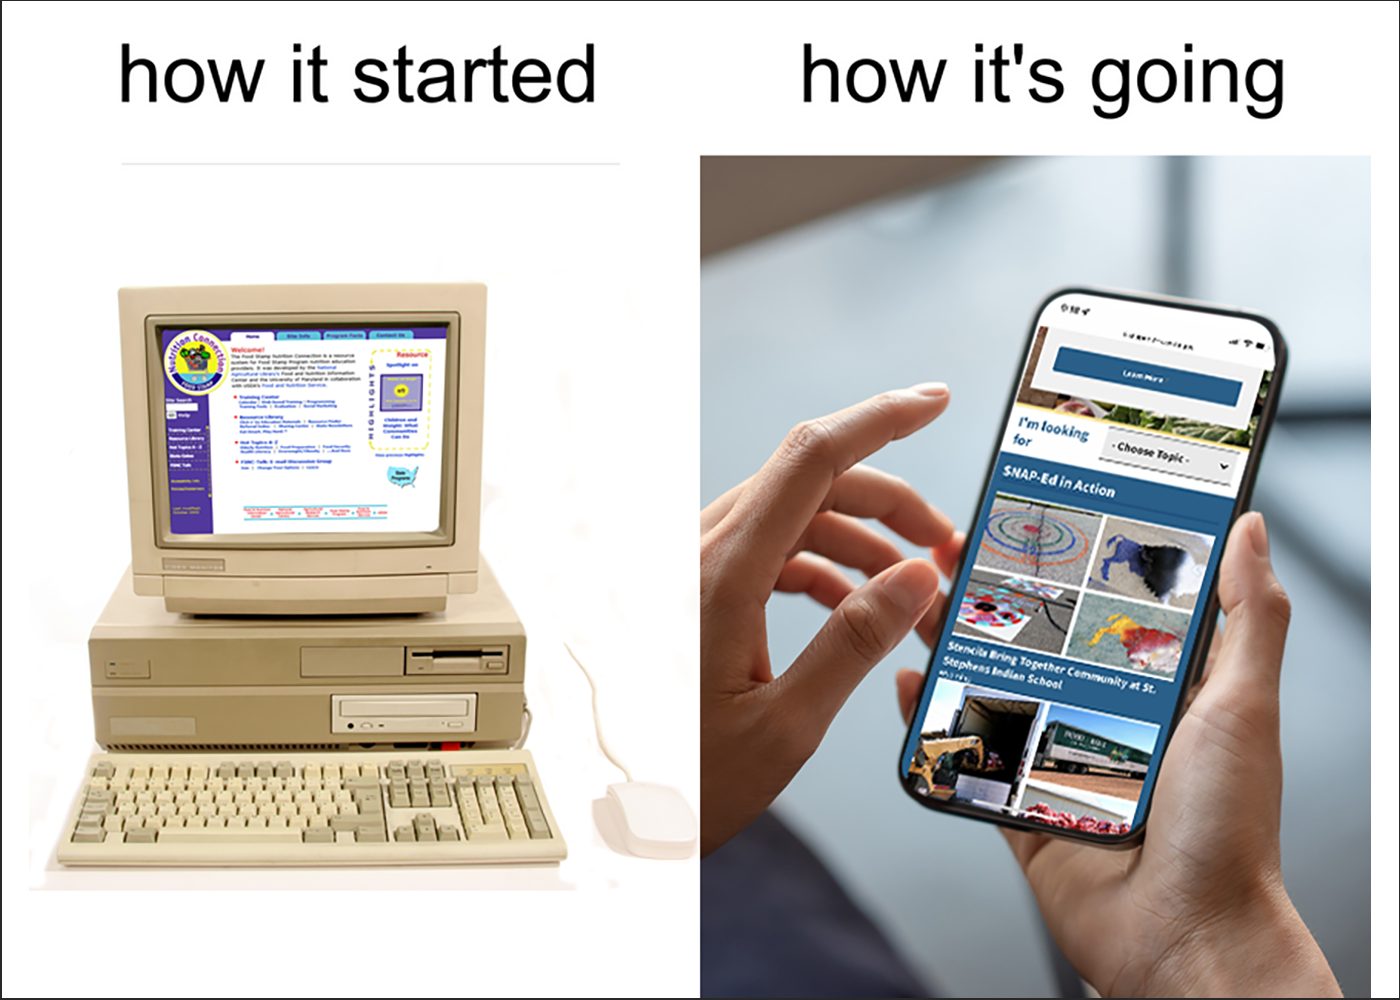 how it started with an image of an old computer and monitor; how it's going with an image of a smart phone